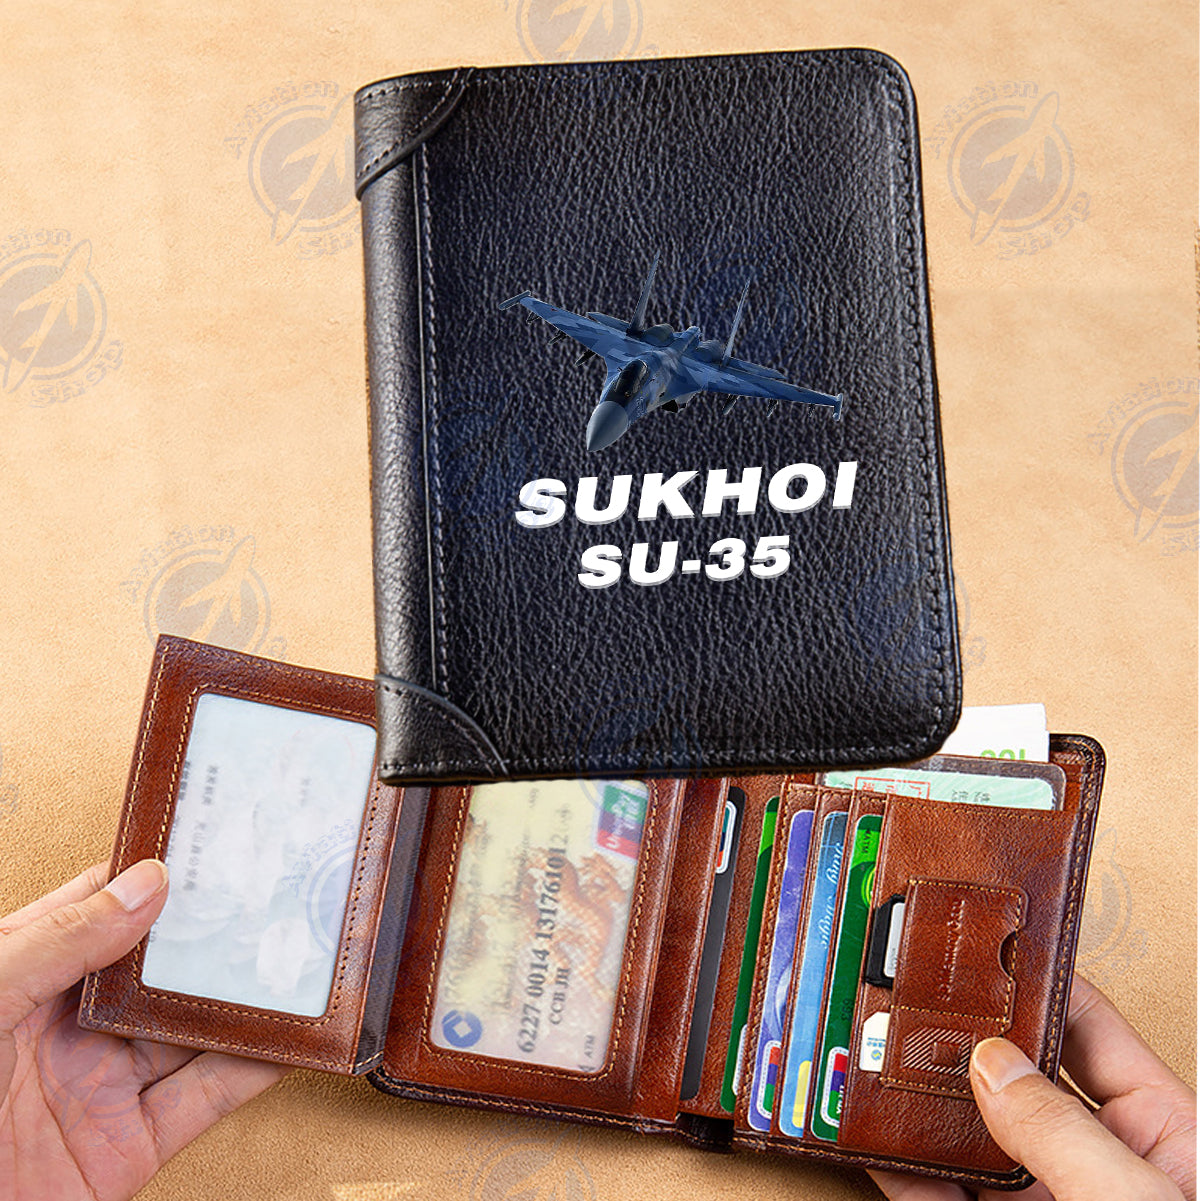 The Sukhoi SU-35 Designed Leather Wallets